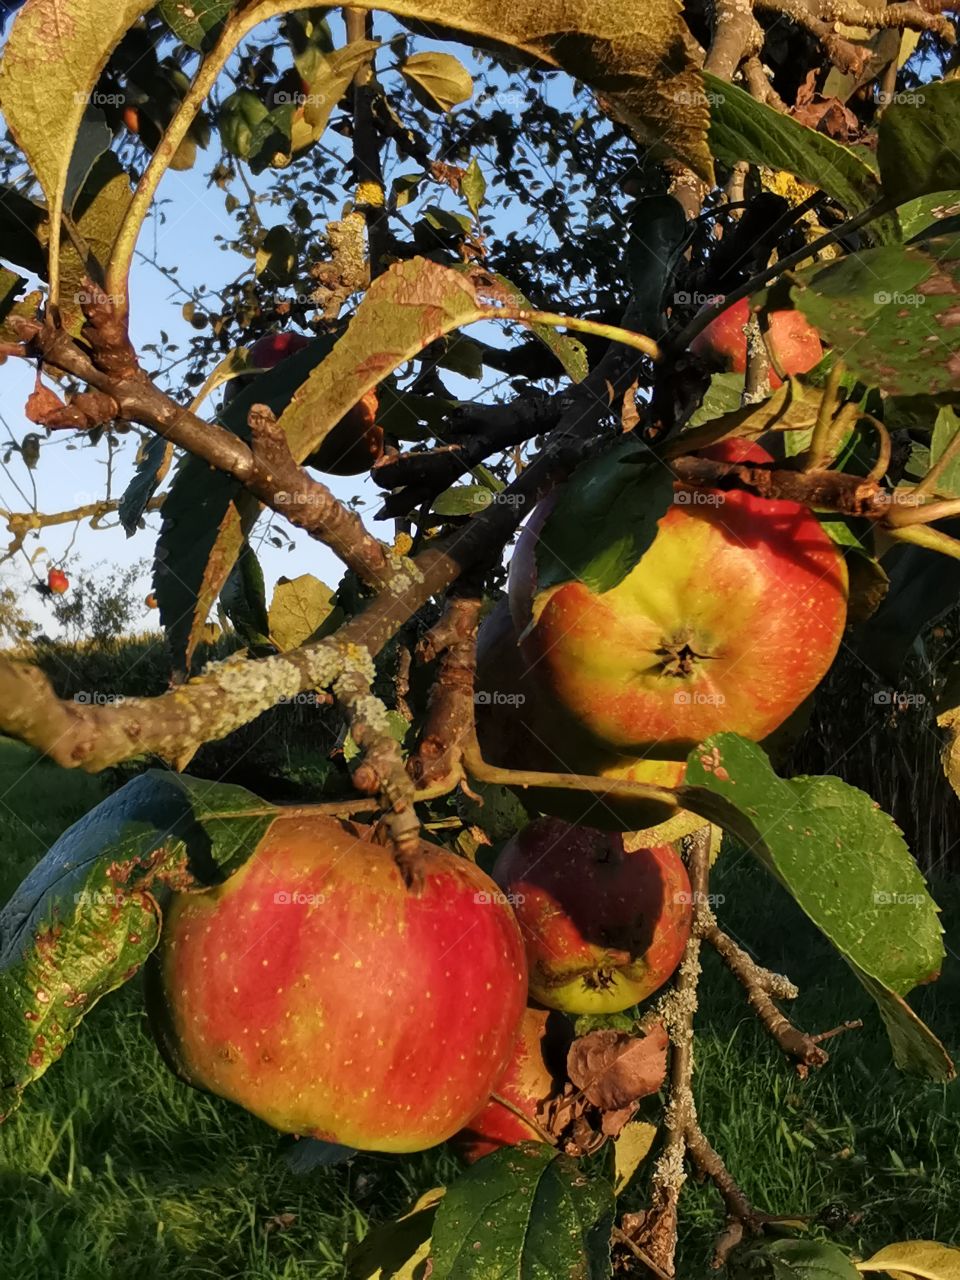 Red apples in the evening light